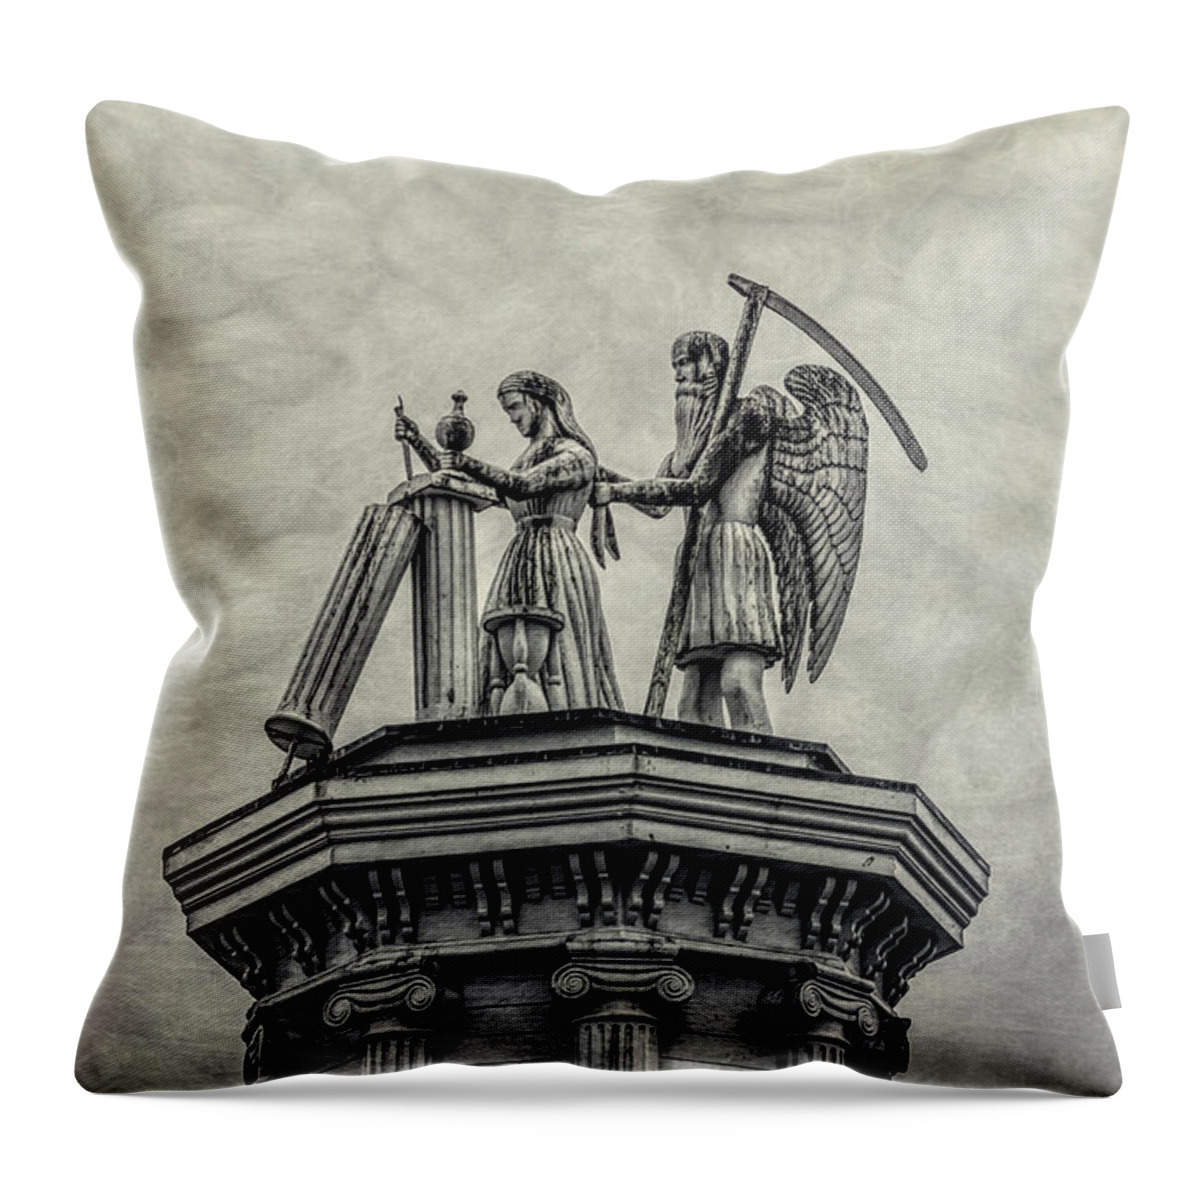 Statue Throw Pillow featuring the photograph Father Time And The Maiden by Garry Gay